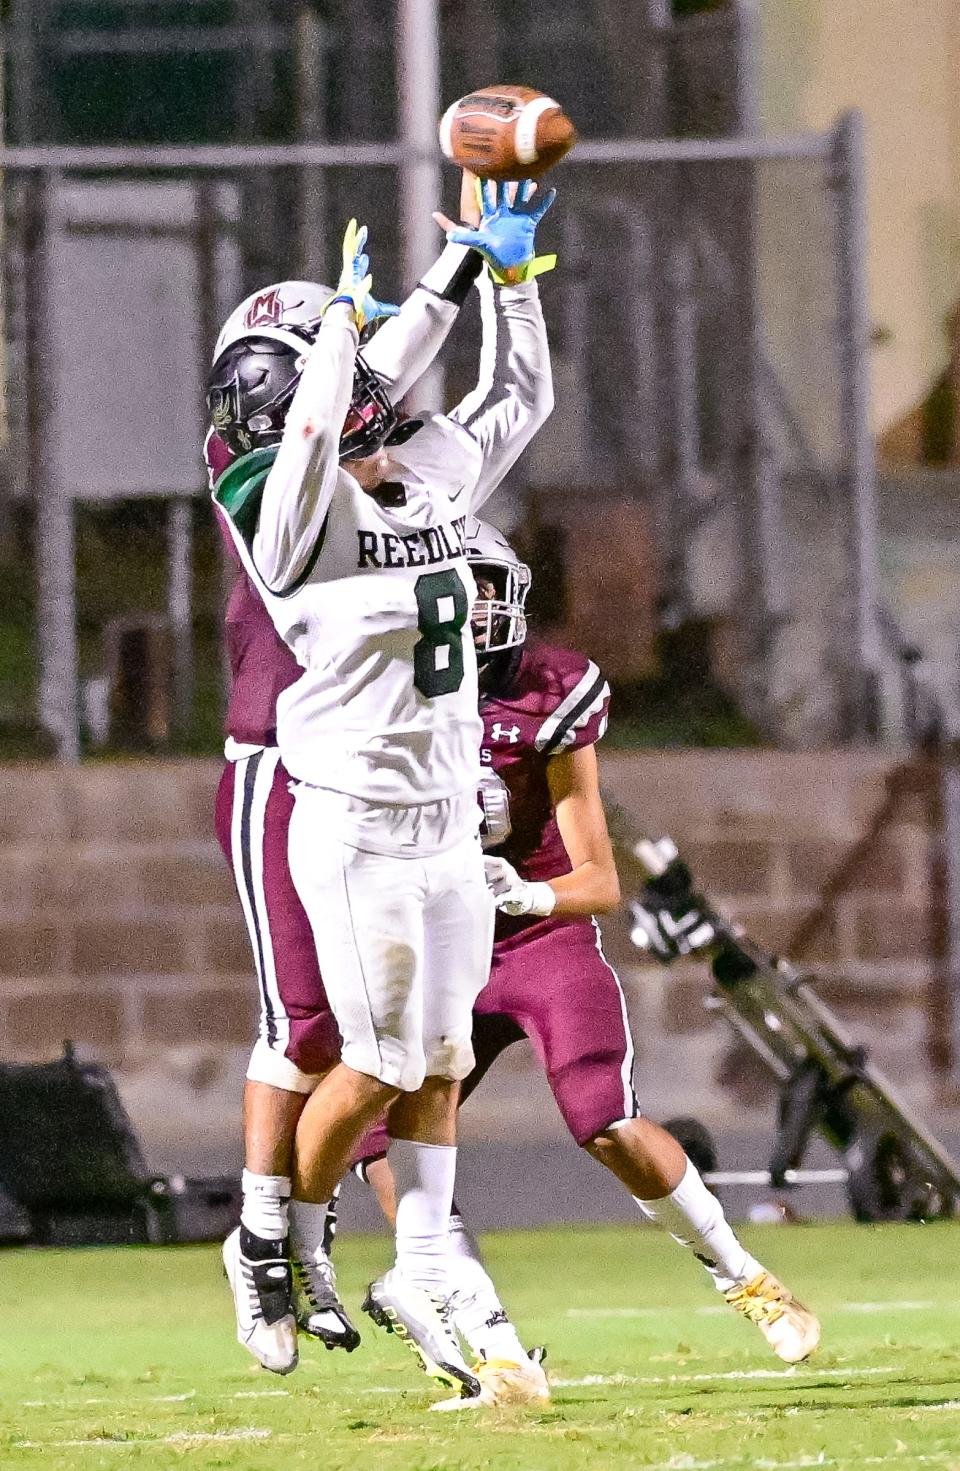 Mt. Whitney's Mario Rodriguez breaks up a pass intended for Reedley's Jayden Galvan in a non-league high school football game on Friday, September 23, 2022. 